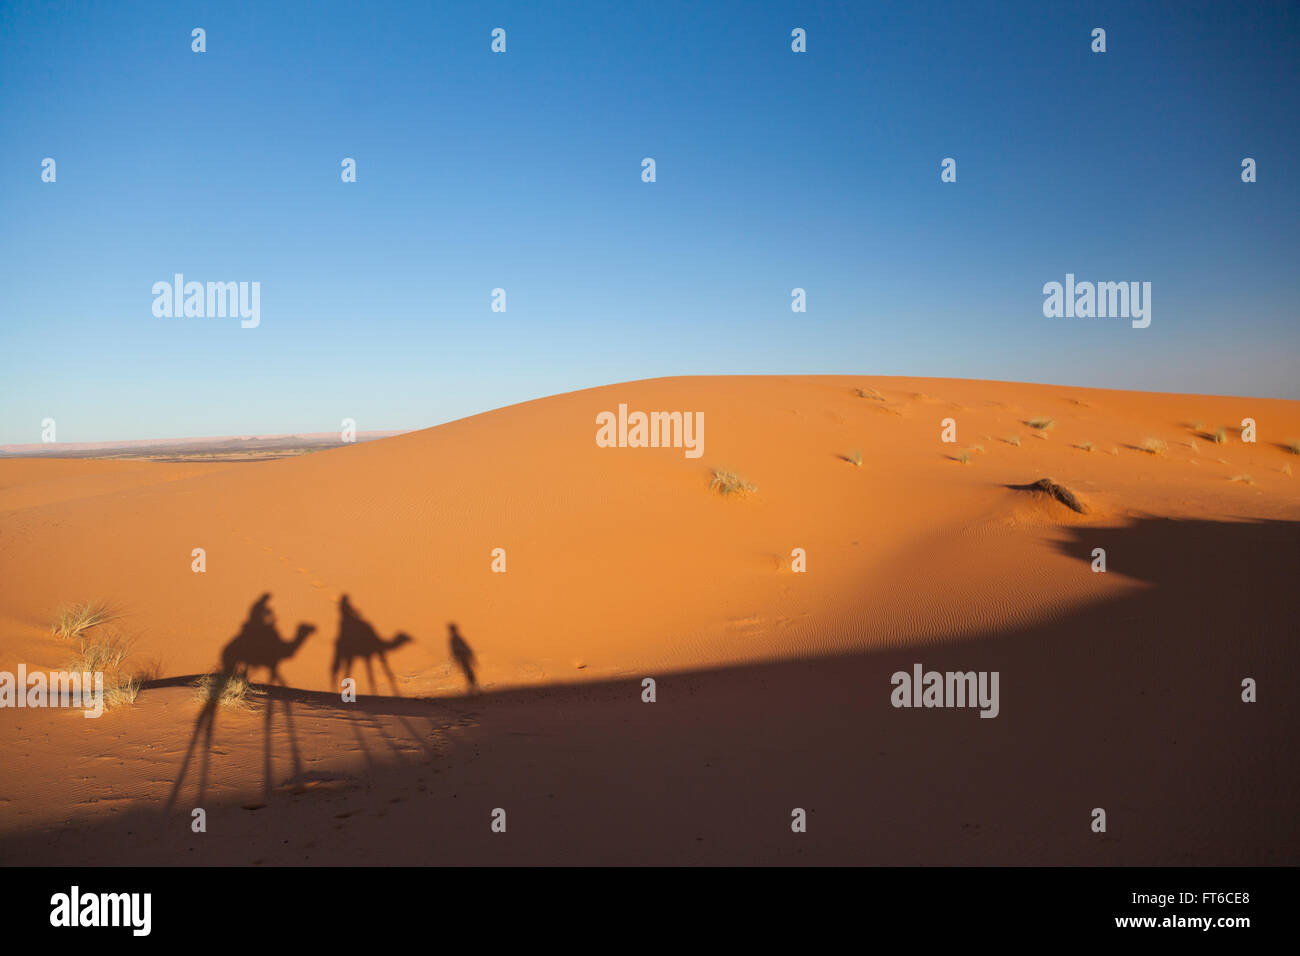 Silhouette of camel and driver, Merzouga Dunes, Morocco Stock Photo